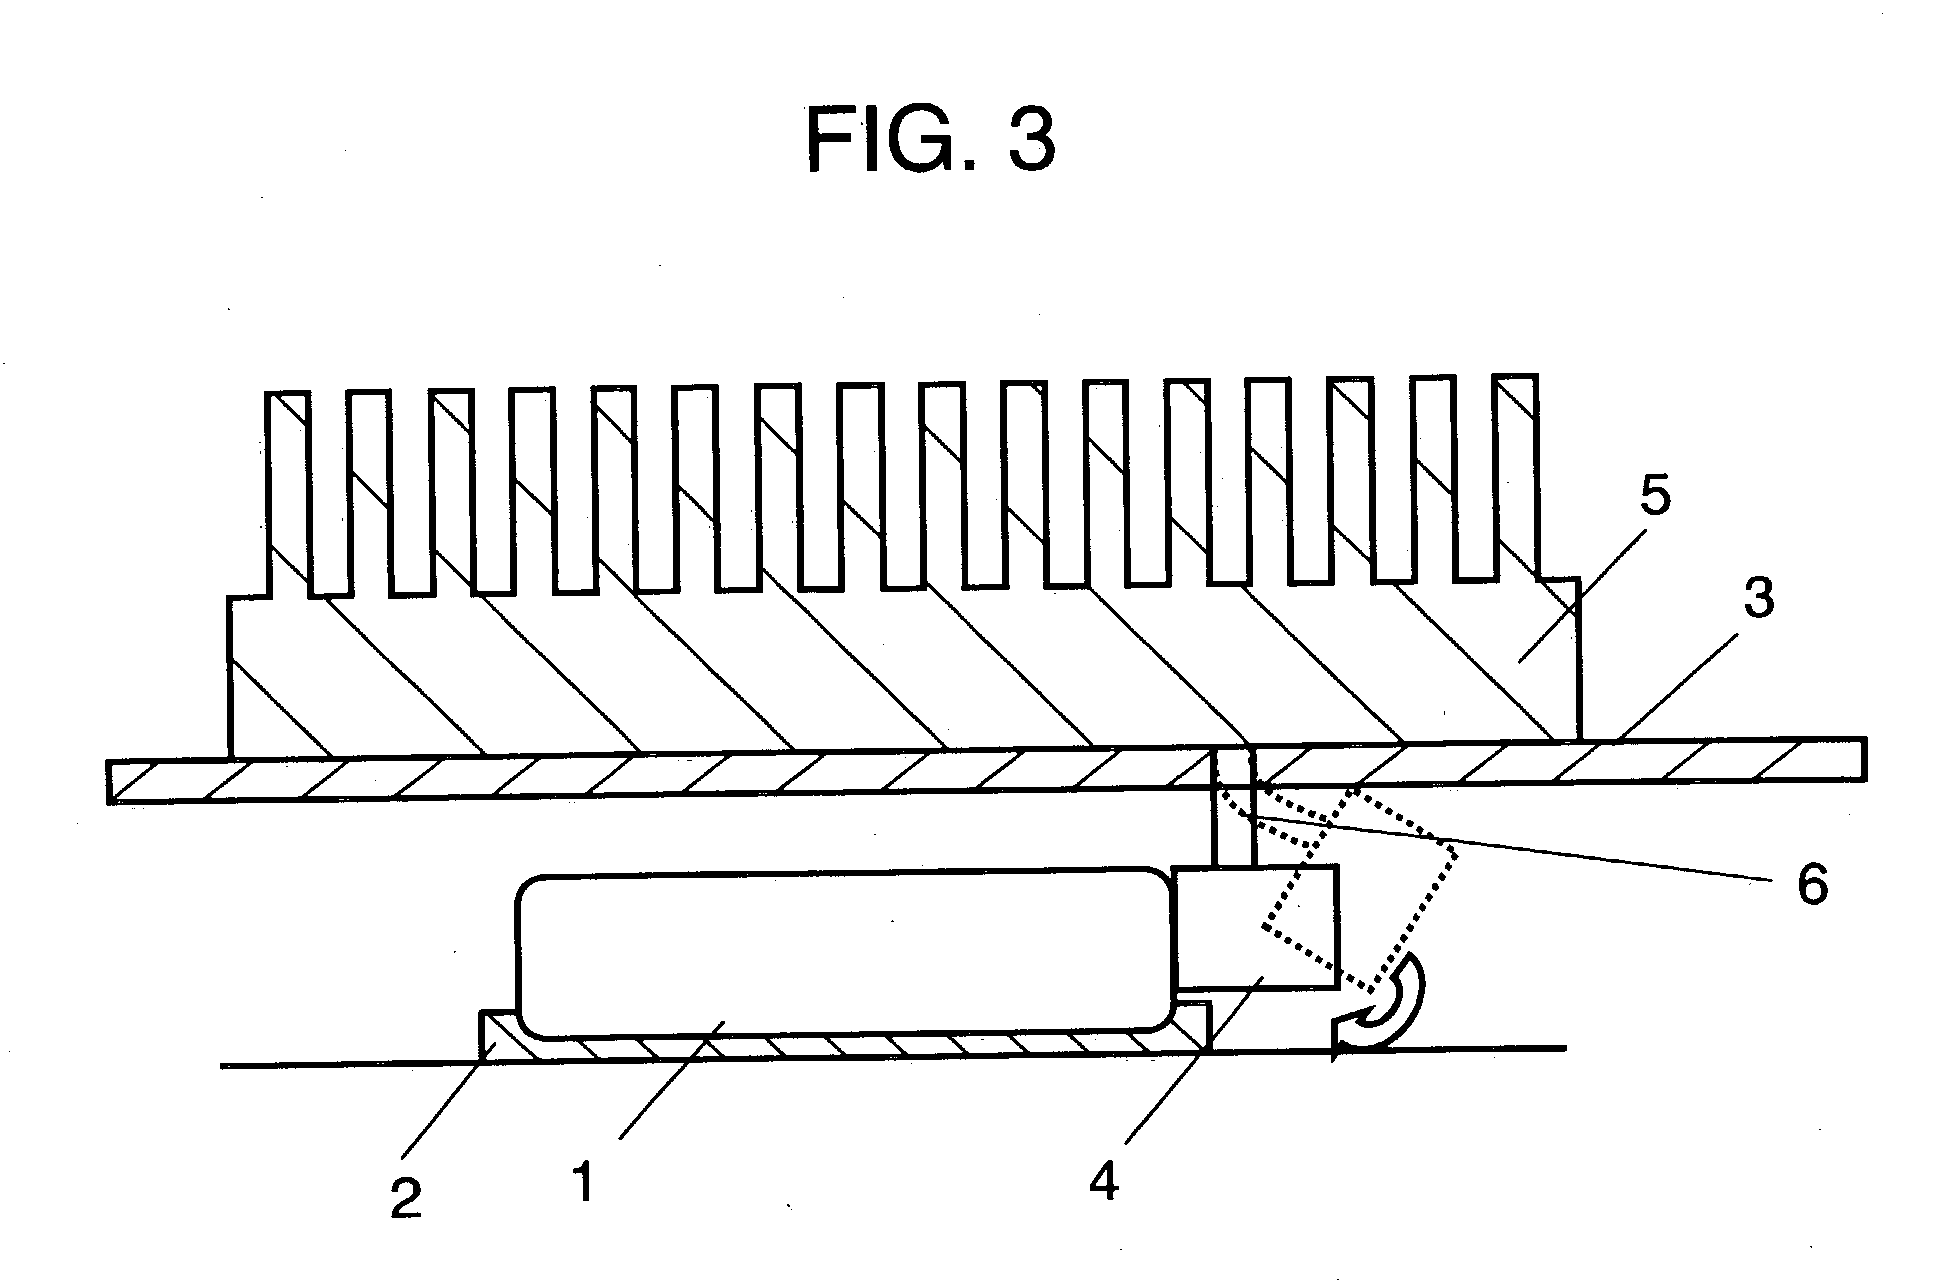 Heat control device for battery